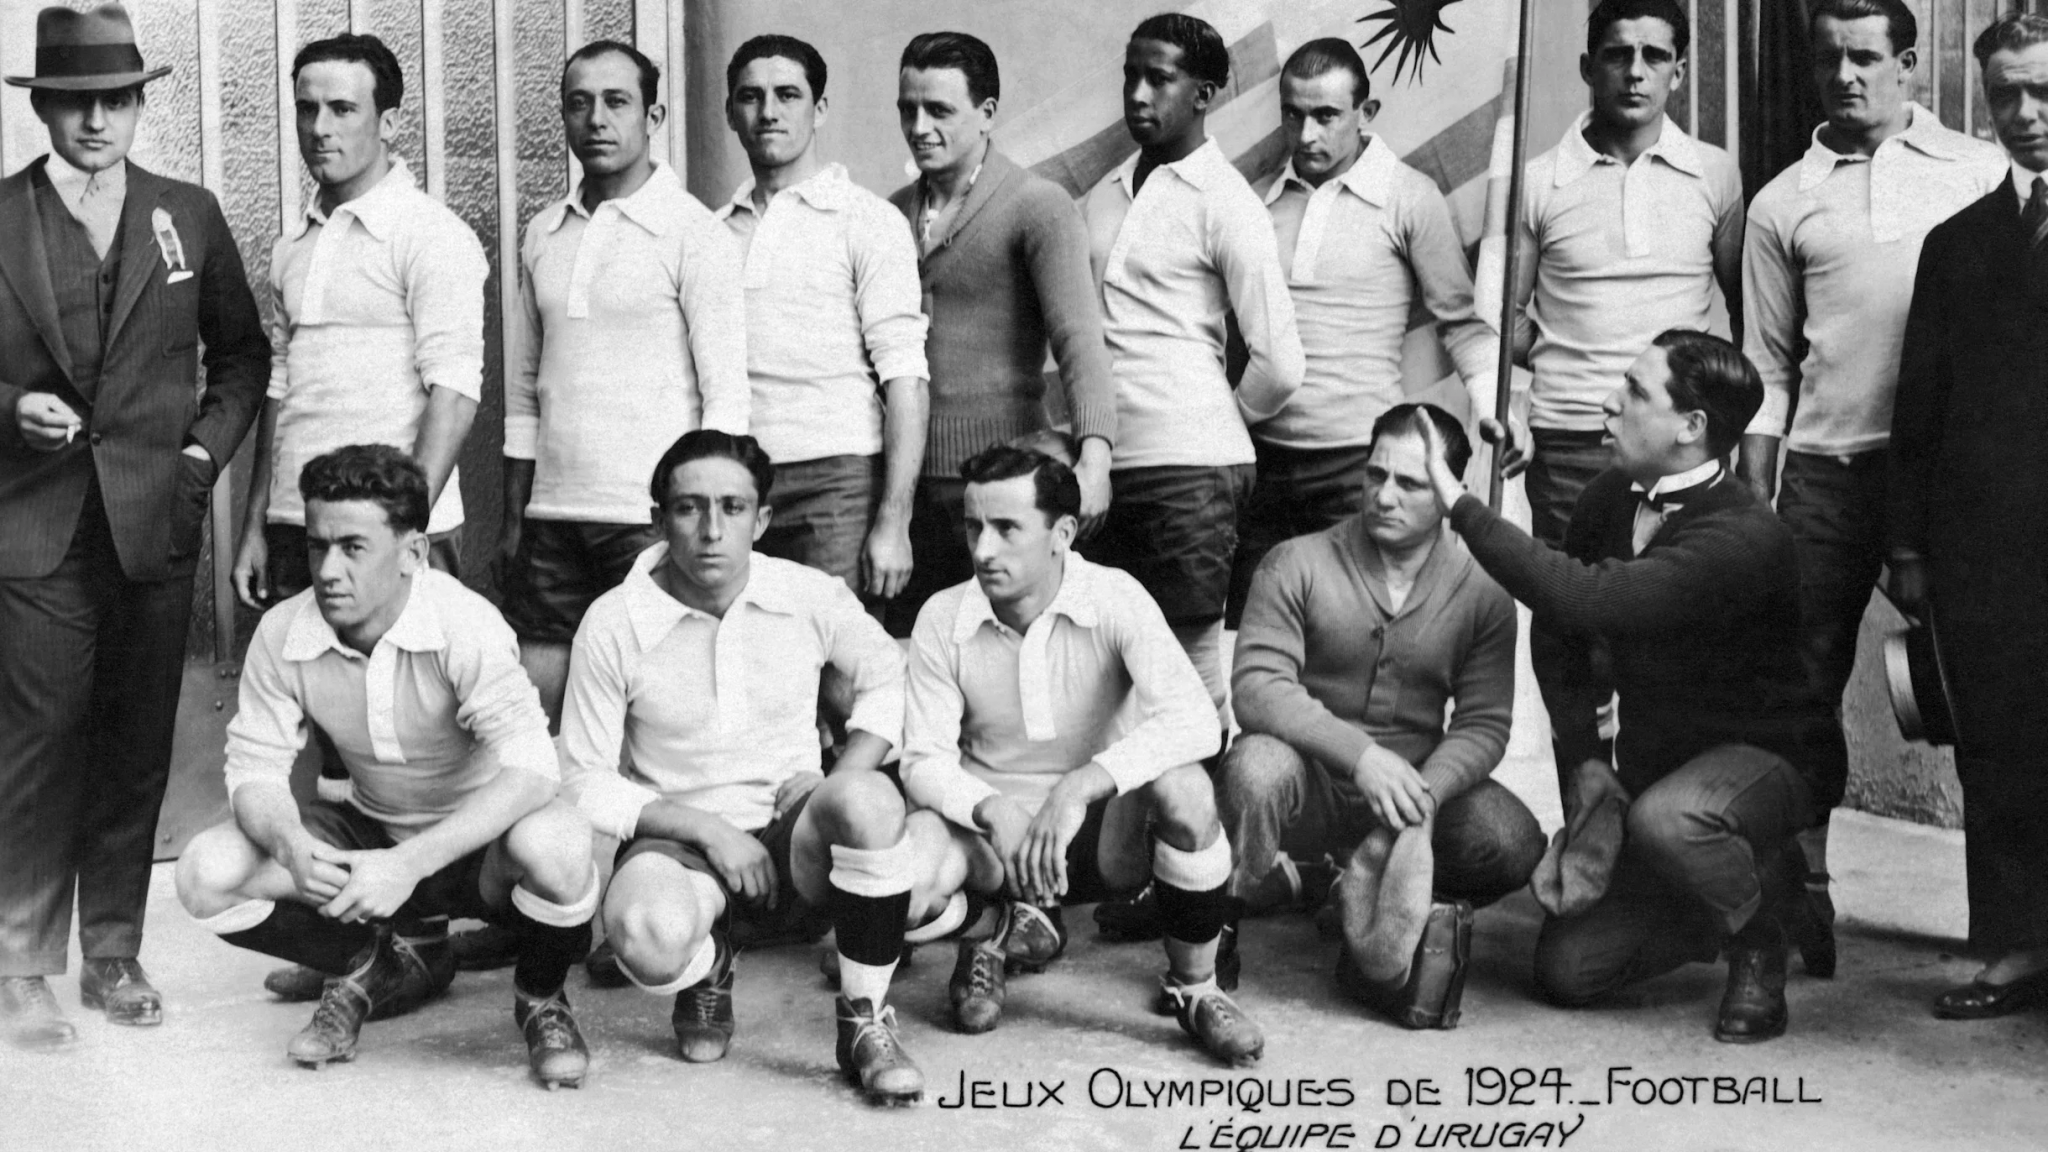 Uruguay won the gold medal in football at their first two Olympic appearances at Paris 2024 and Amsterdam 1928 but have not won one since ©Olympic Museum